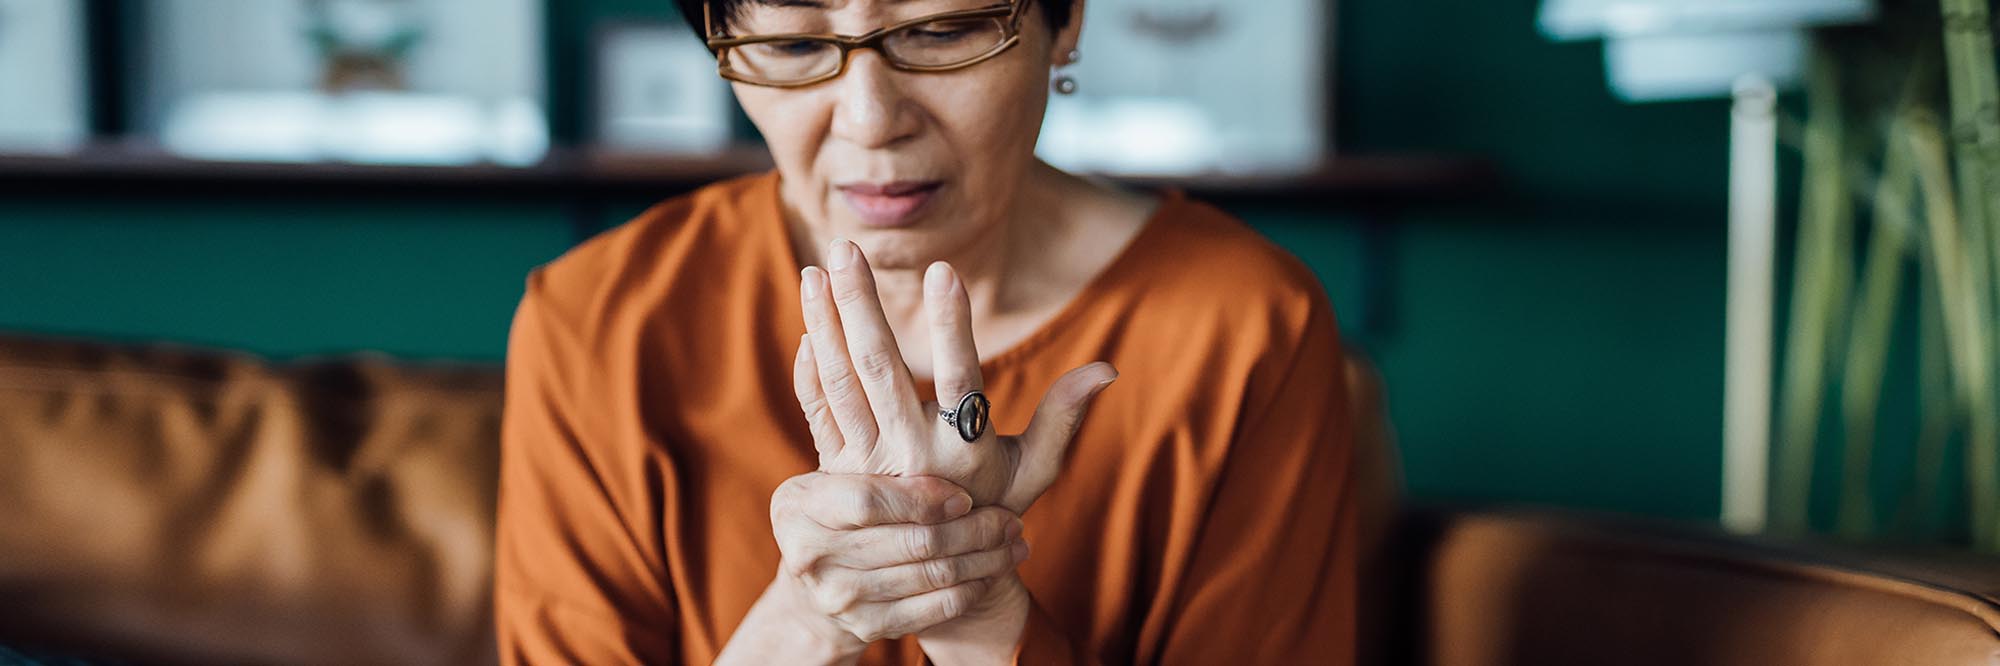 Pain in your joints? Learn the different types of arthritis